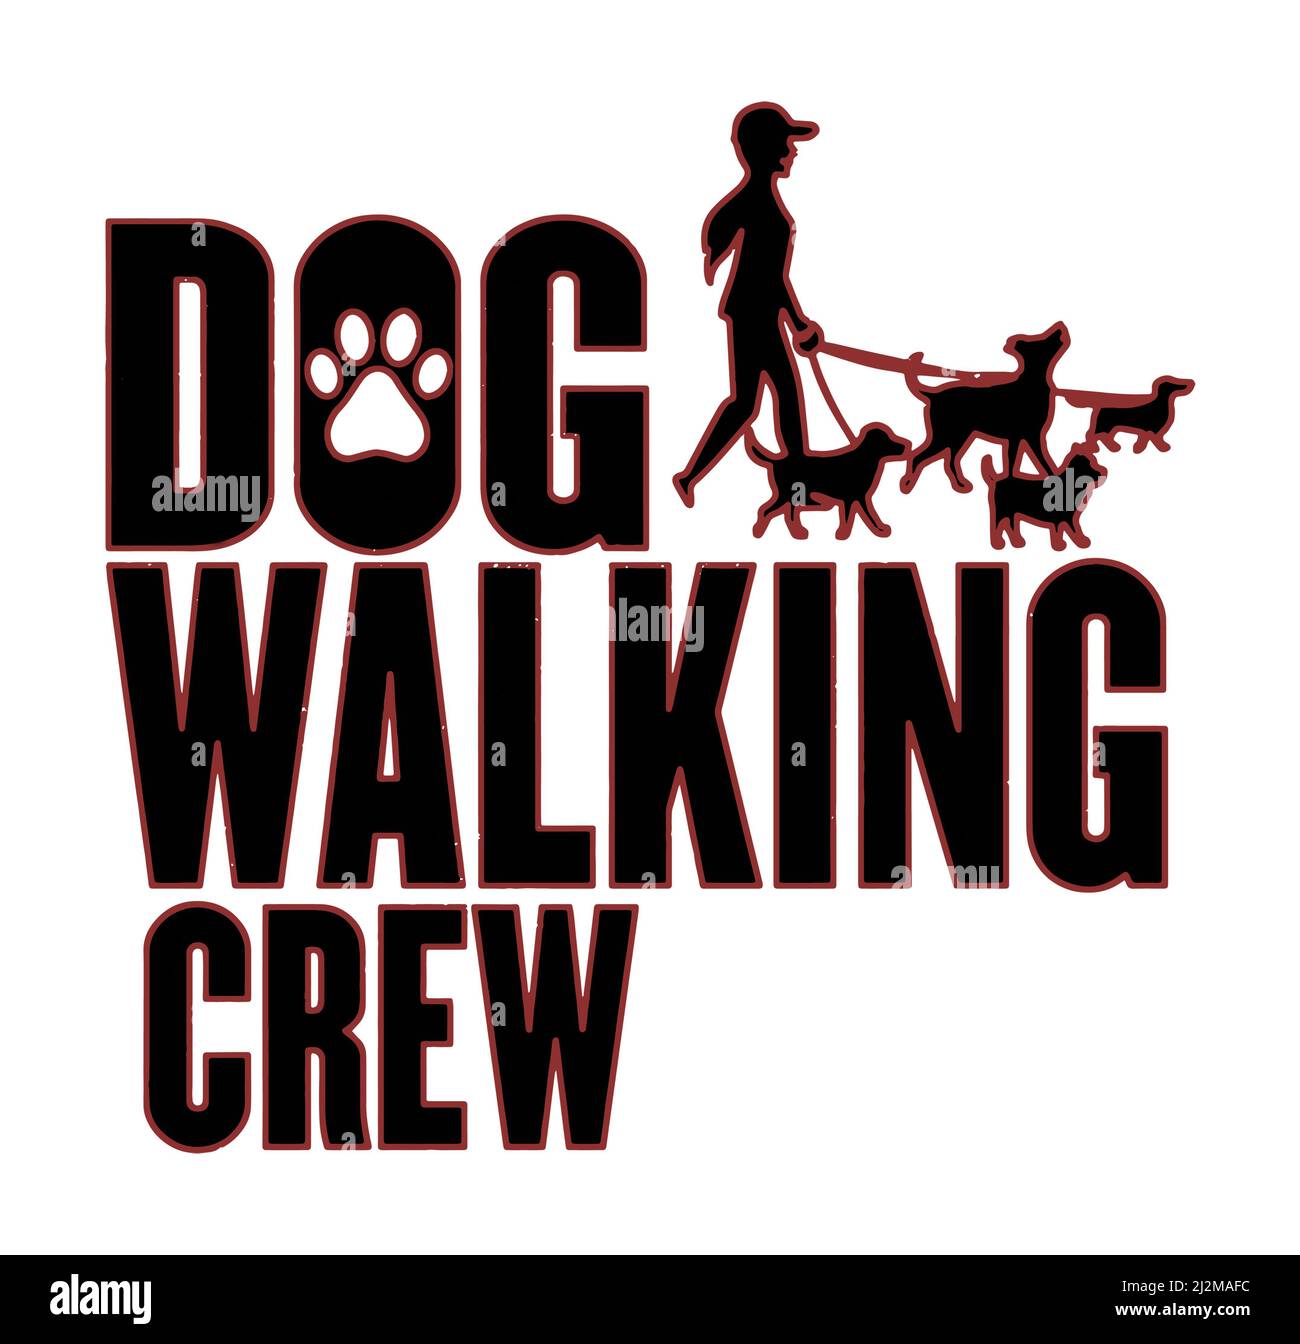 Dog walking crew for dog walkers graphic illustration with black text on a white background. Stock Photo